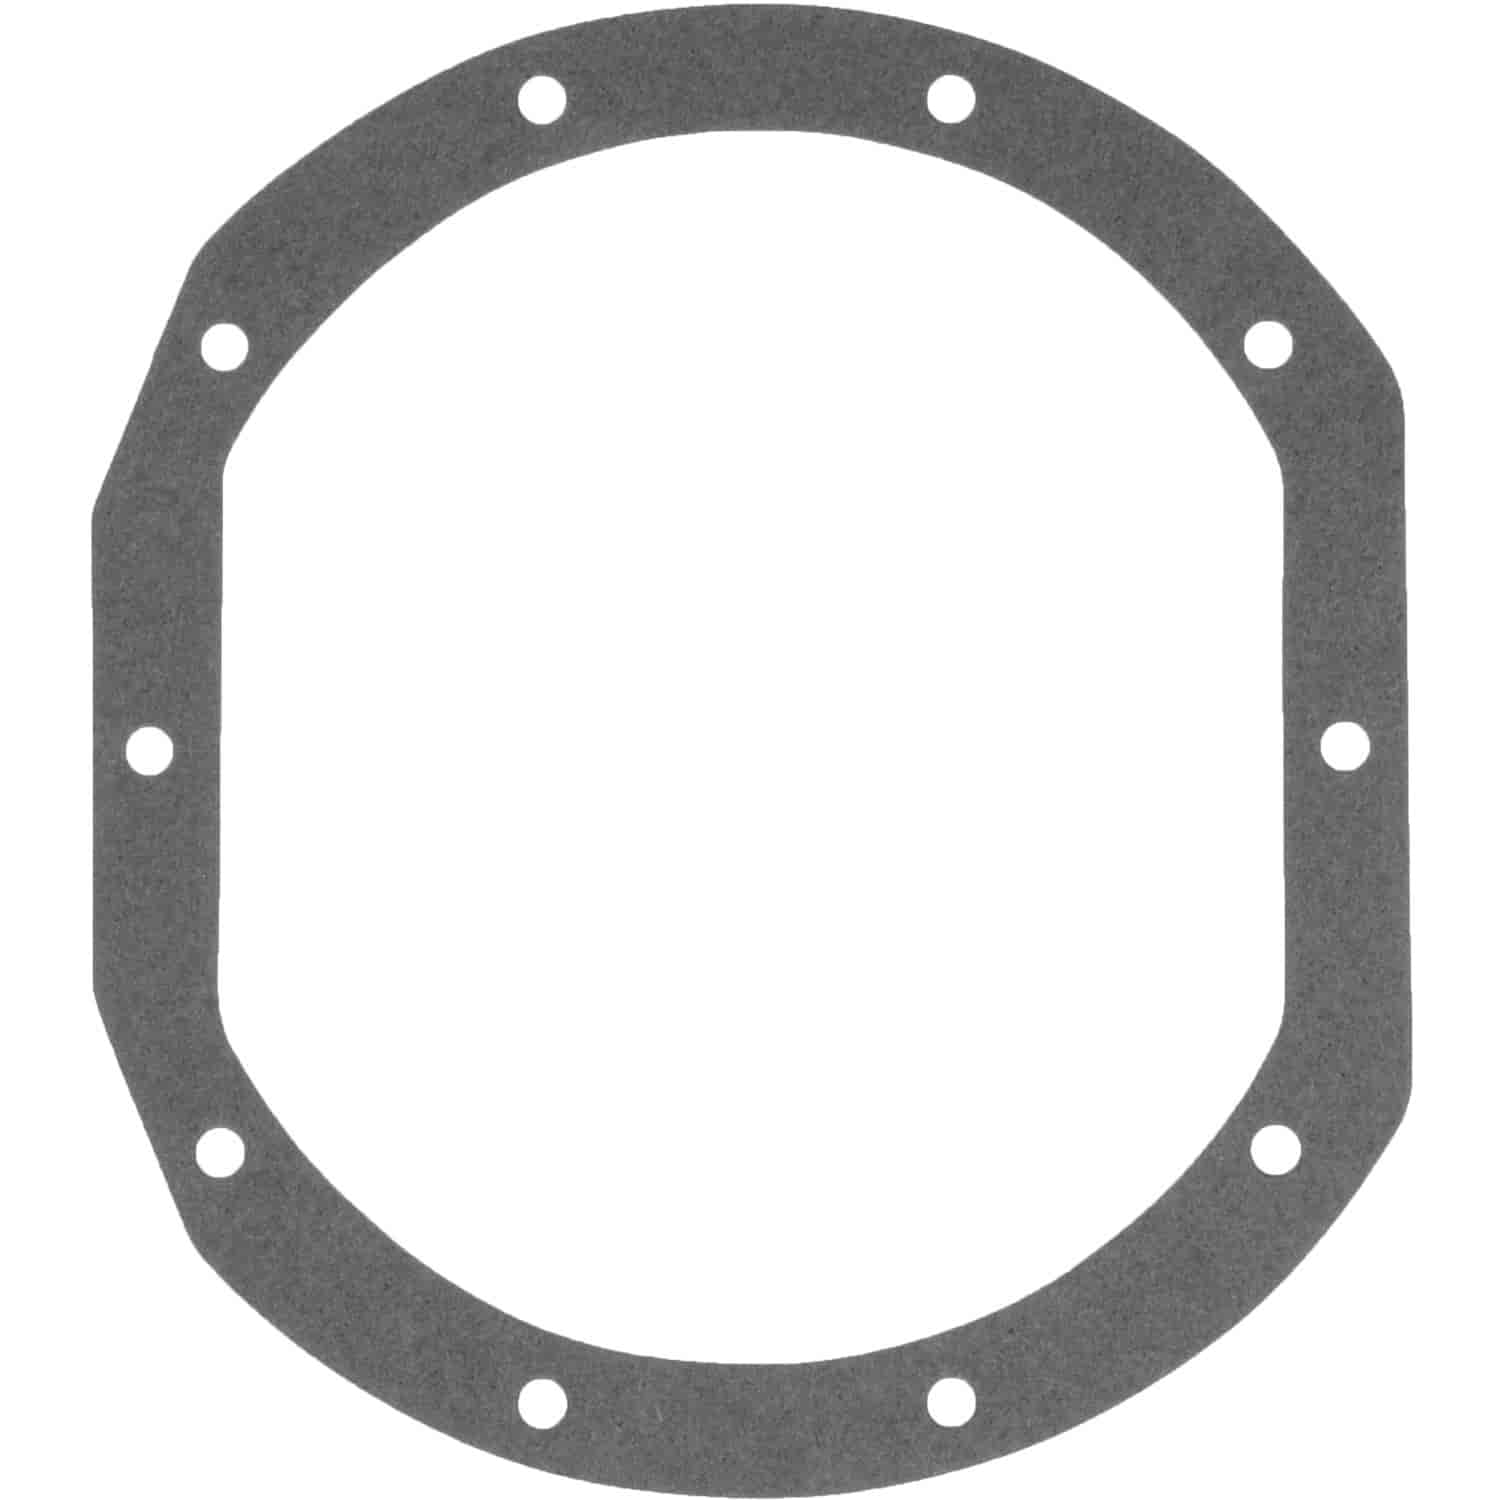 Differential Cover Gasket Ford 10-Bolt (7.5" Ring Gear)